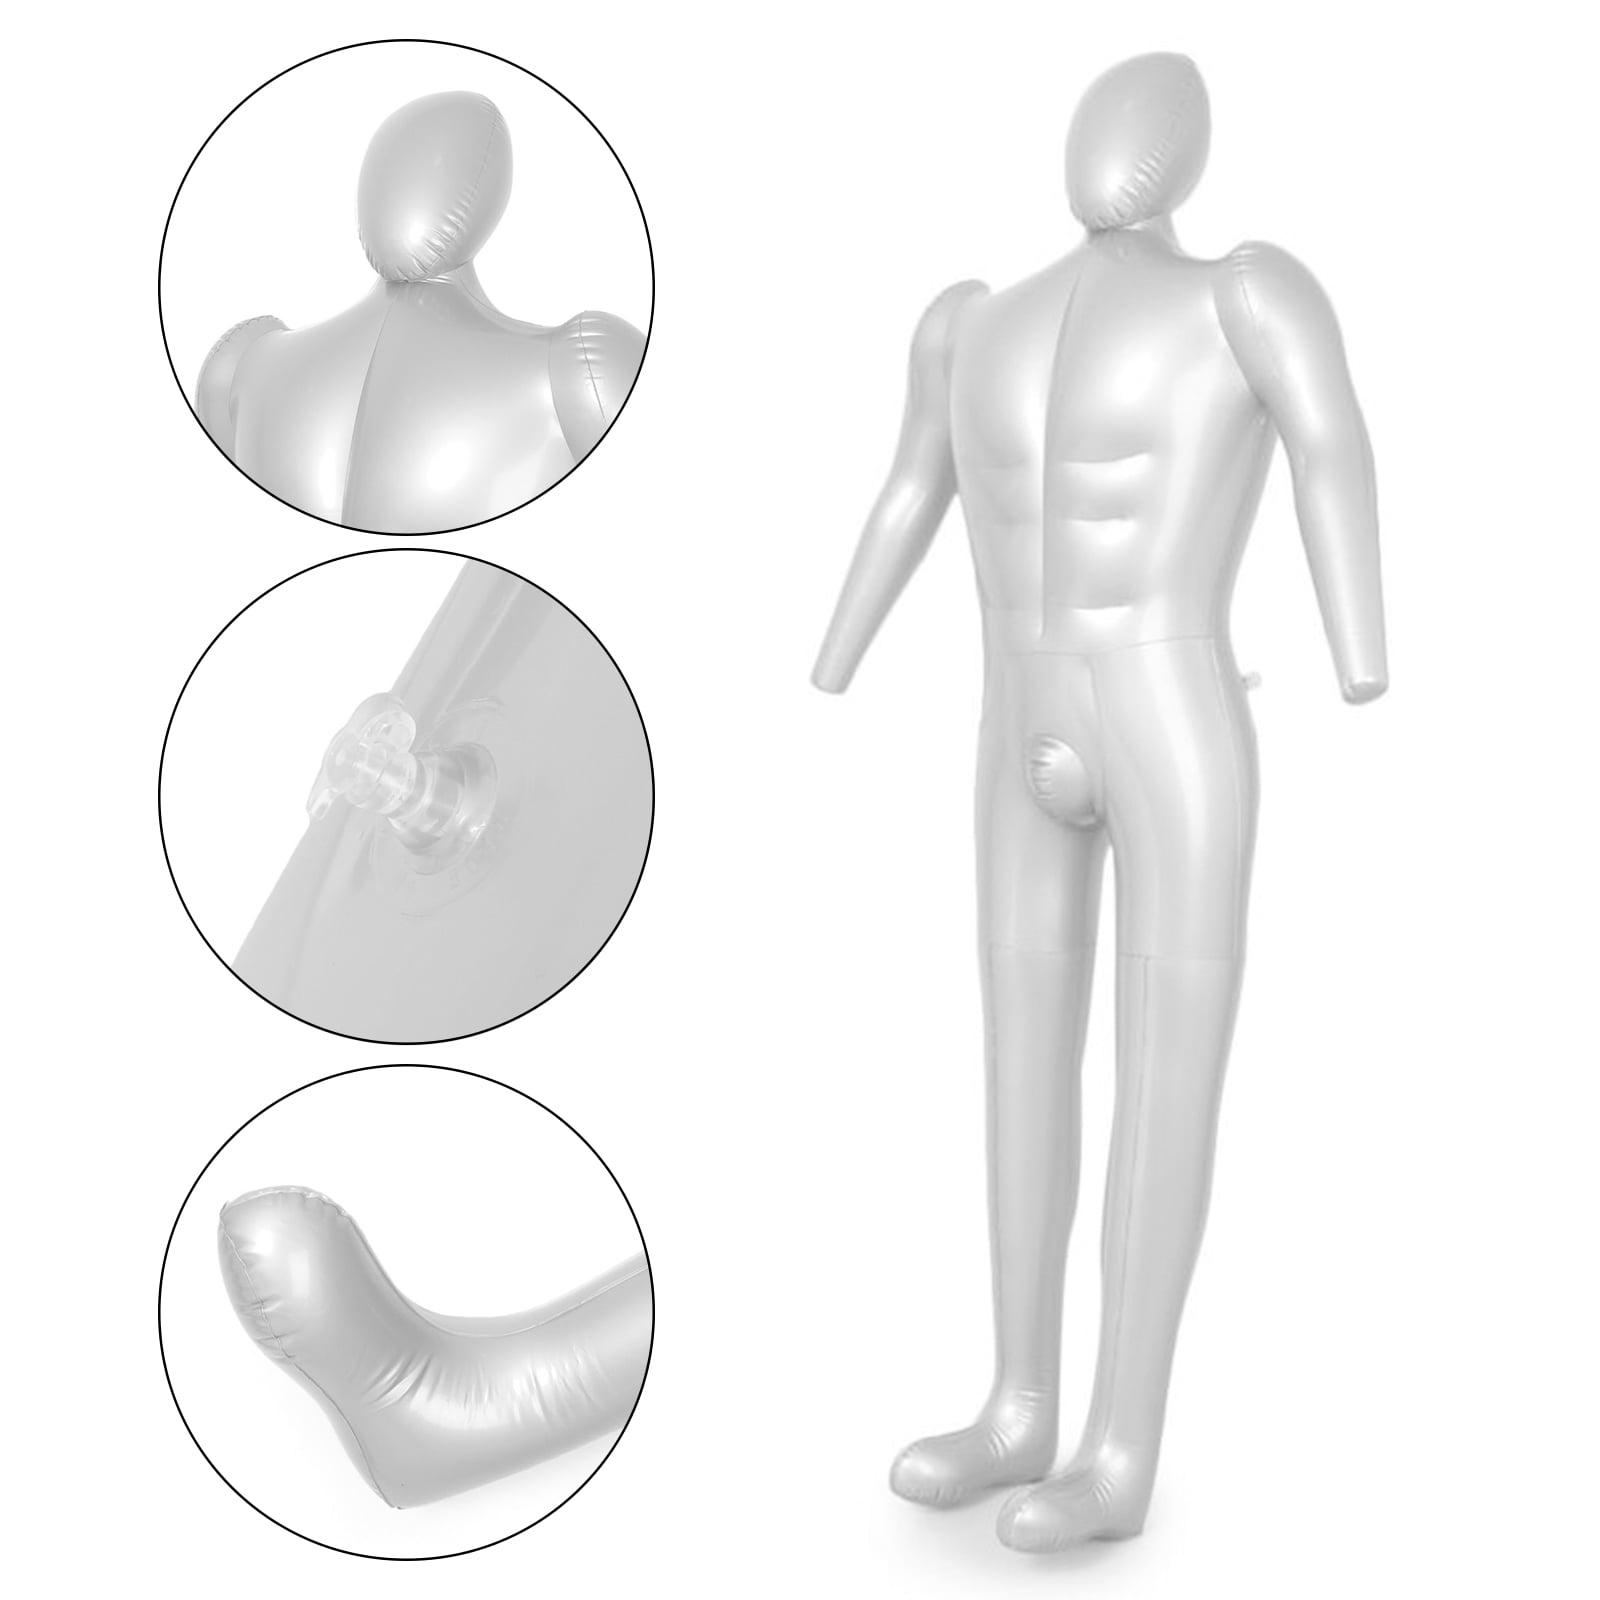 71cm Inflatable Adult Mannequin Male Bust T-shirt Tops Dummy Display Holder 